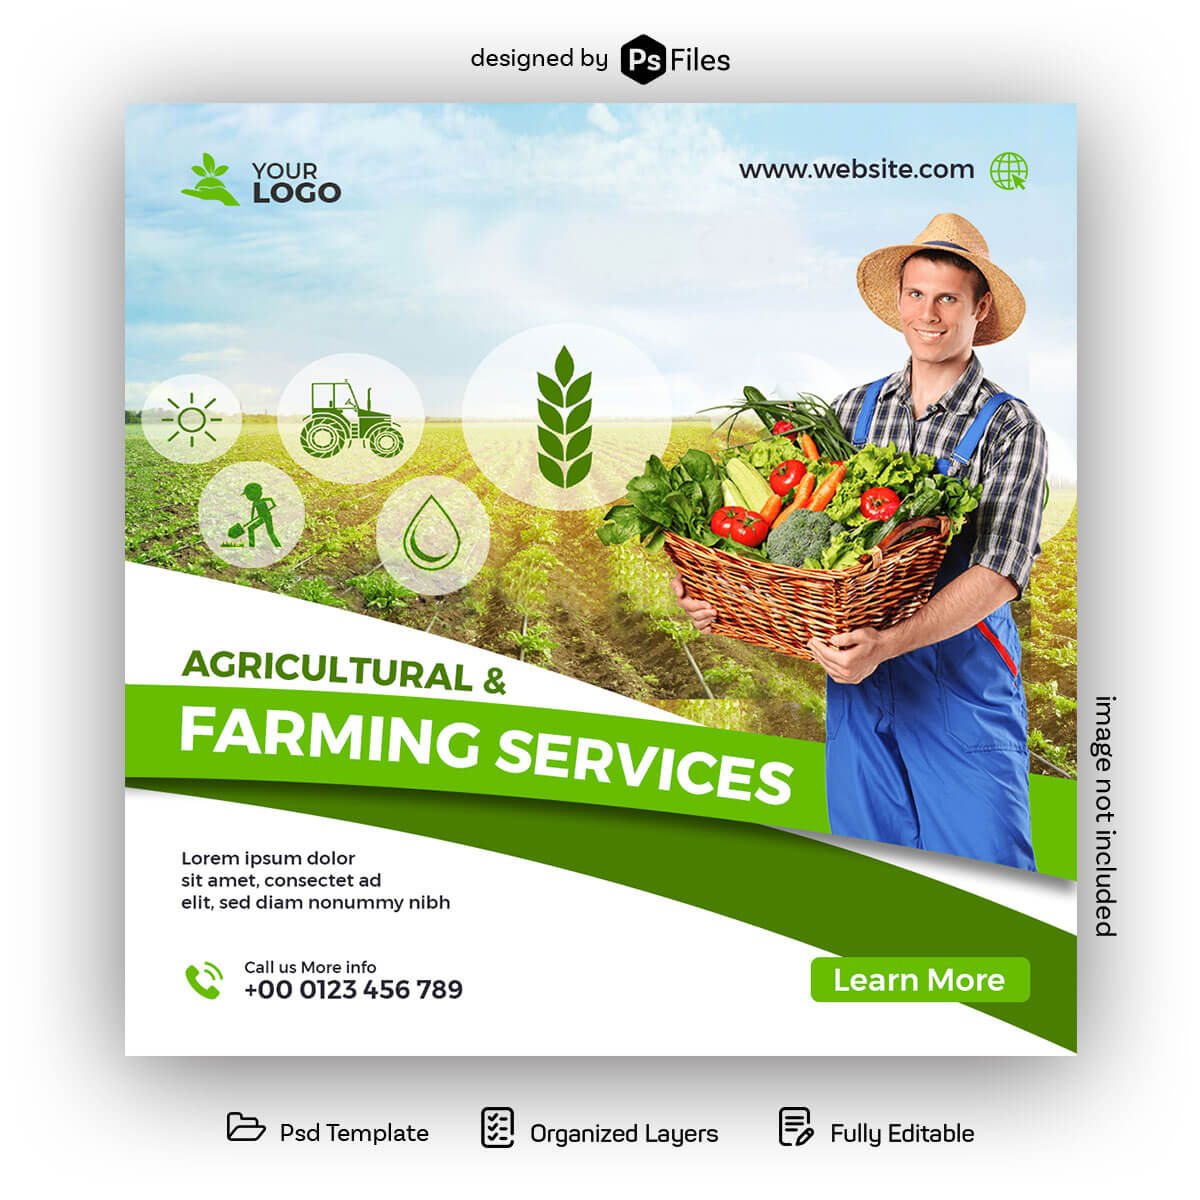 PsFiles Free Agricultural and Farming Business Social Media Post Design PSD Template